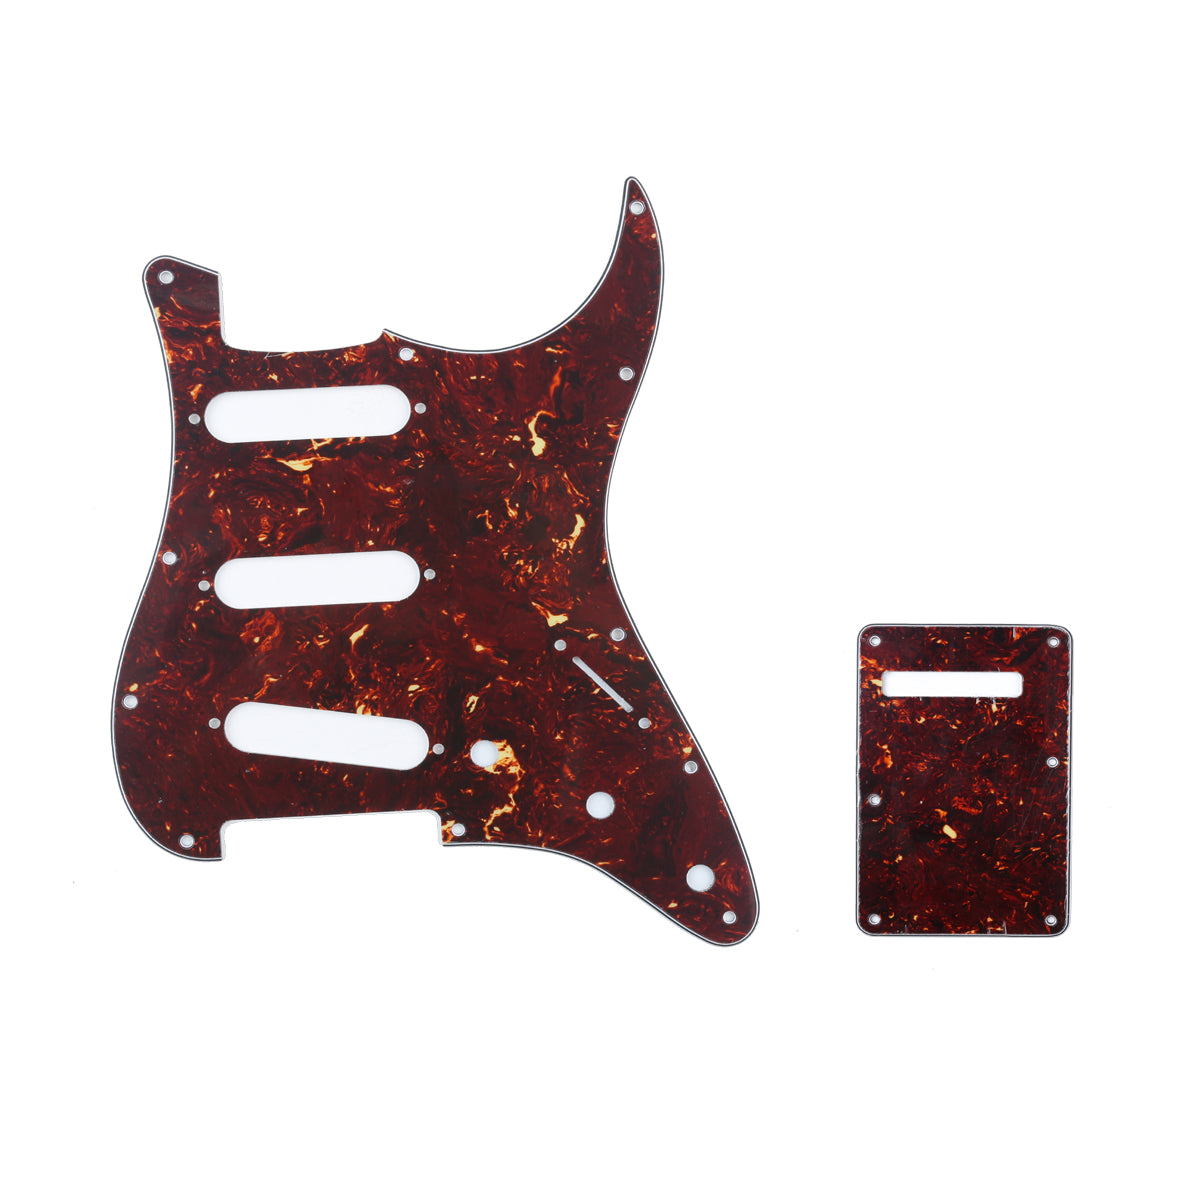 Musiclily SSS 11 Hole Strat Guitar Pickguard and BackPlate Set for Fender USA/Mexican Standard Stratocaster Modern Style, 4Ply Tortoise Shell